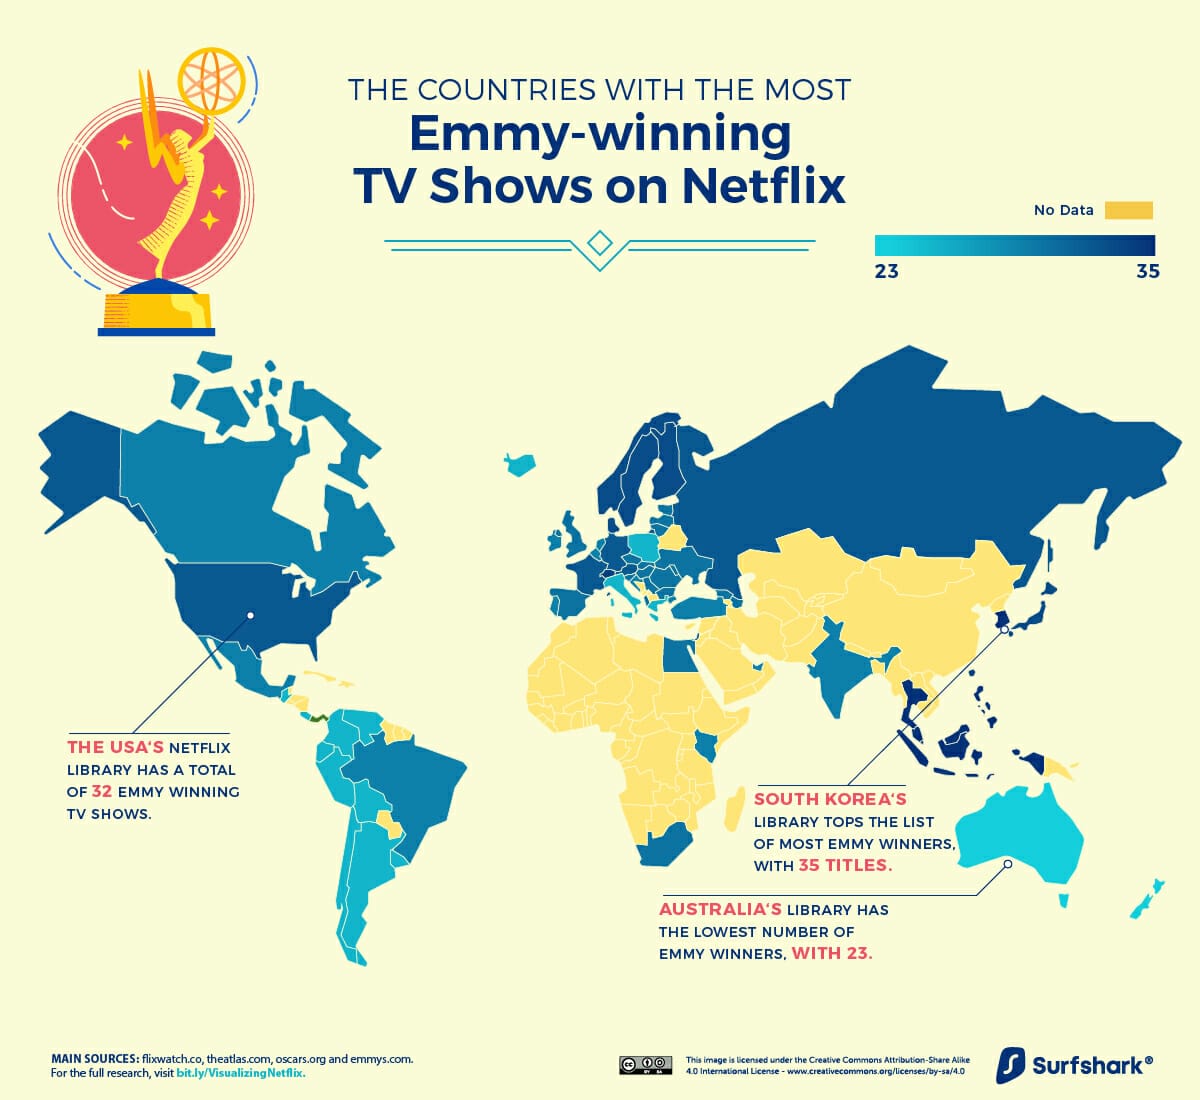 Countries with the Most Emmy Award Winners on Netflix